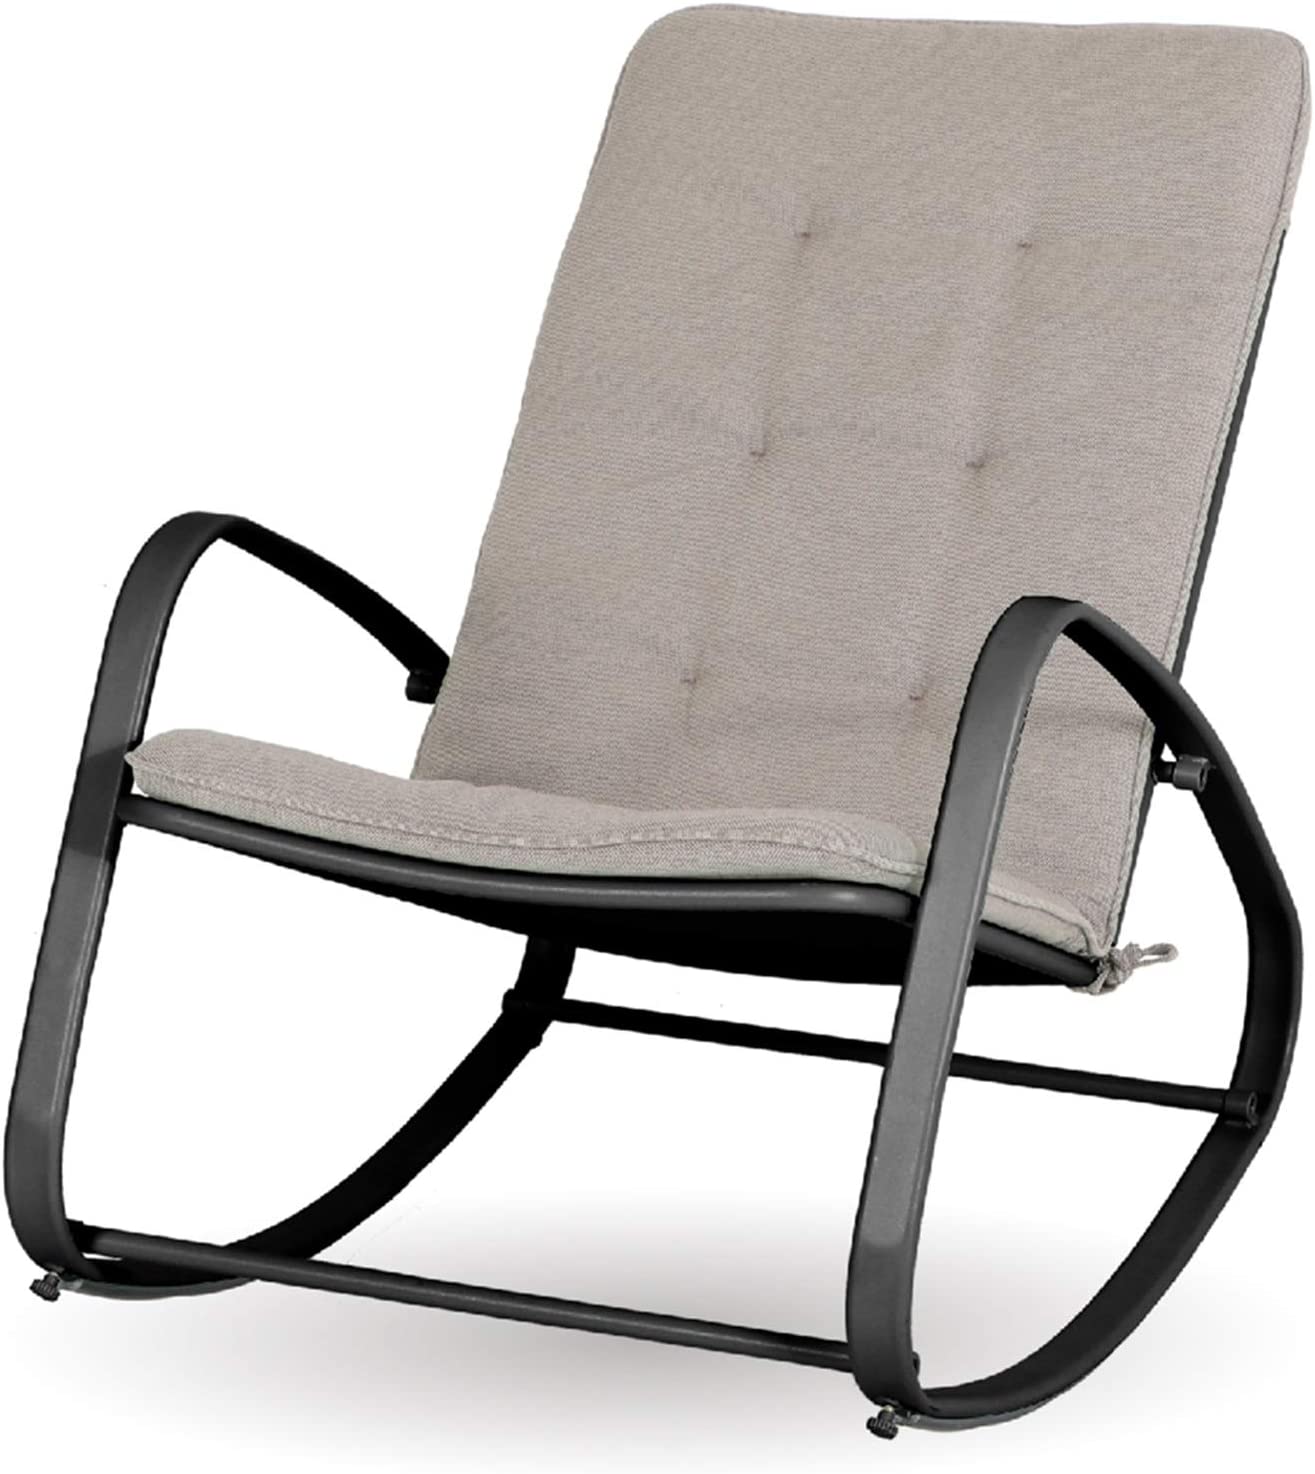 Best Outdoor Chair For Elderly Sorted And Analyzed